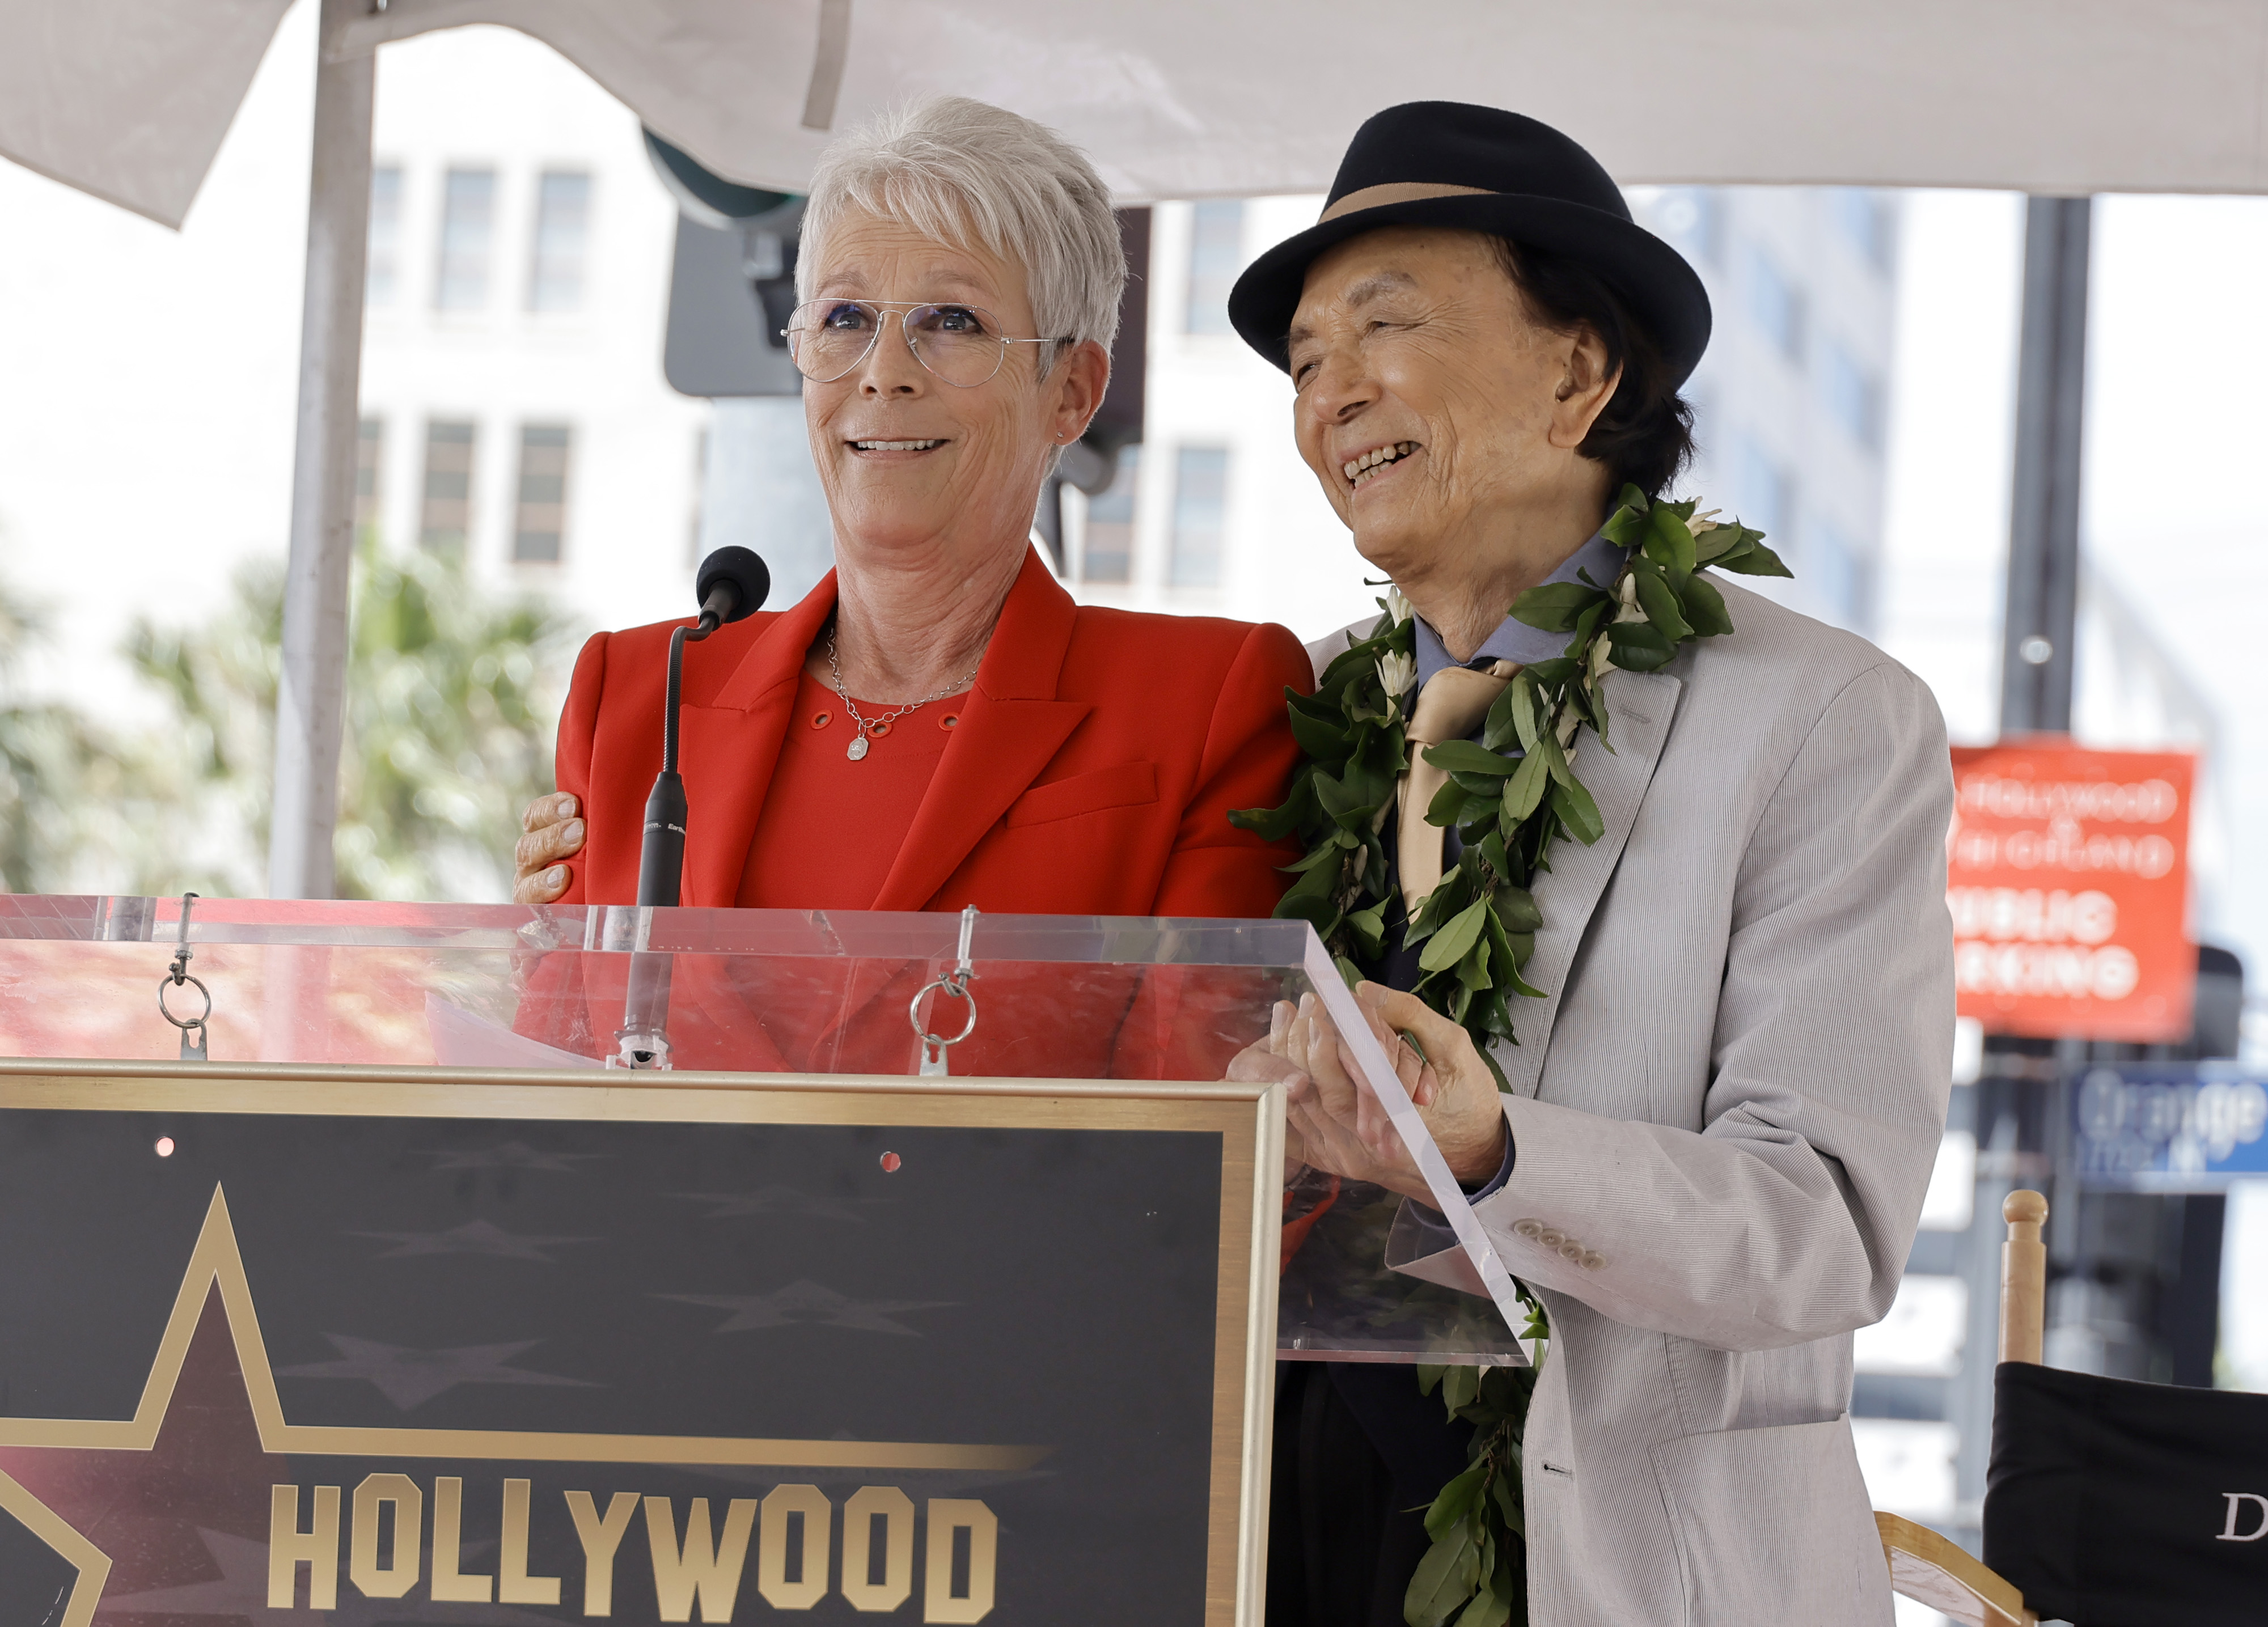 (L-R) Jamie Lee Curtis and James Hong speak onstage during the Hollywood Walk of Fame Star Ceremony for James Hong on May 10, 2022, in Hollywood, Calif.